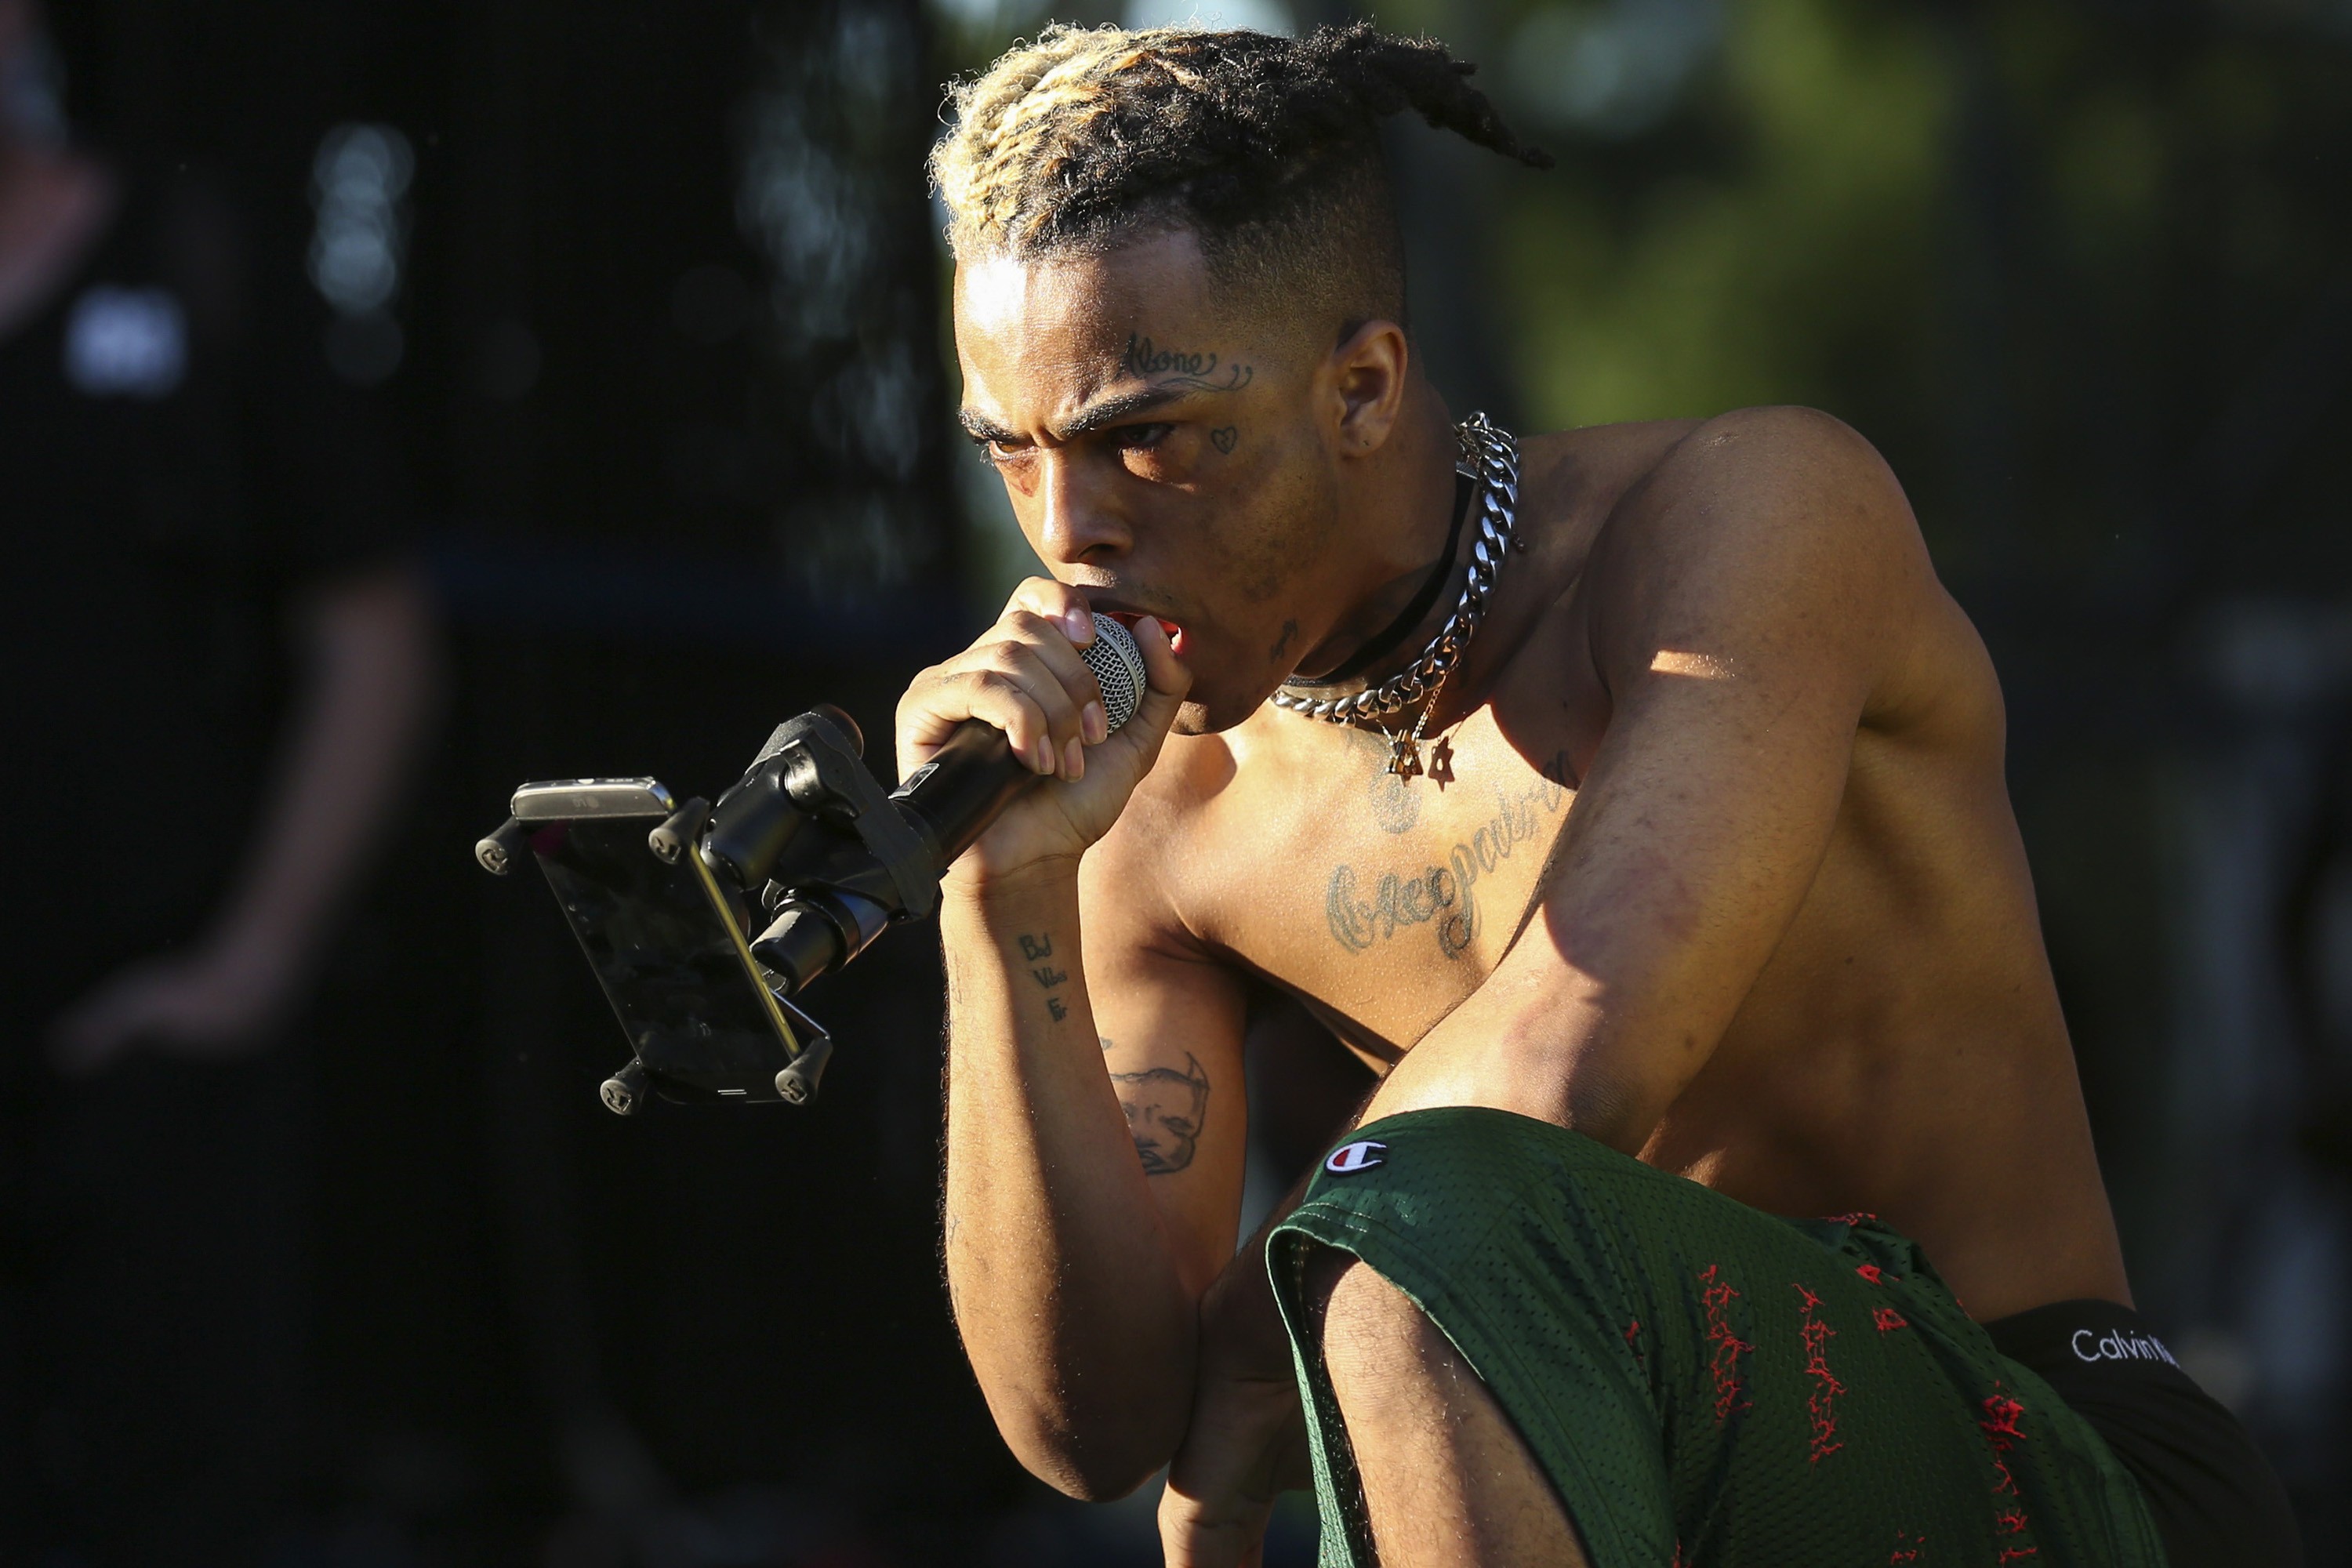 sukker tennis vaskepulver Chart-topping rapper XXXTentacion is shot dead at 20, after a fast and  violent rise to fame | South China Morning Post